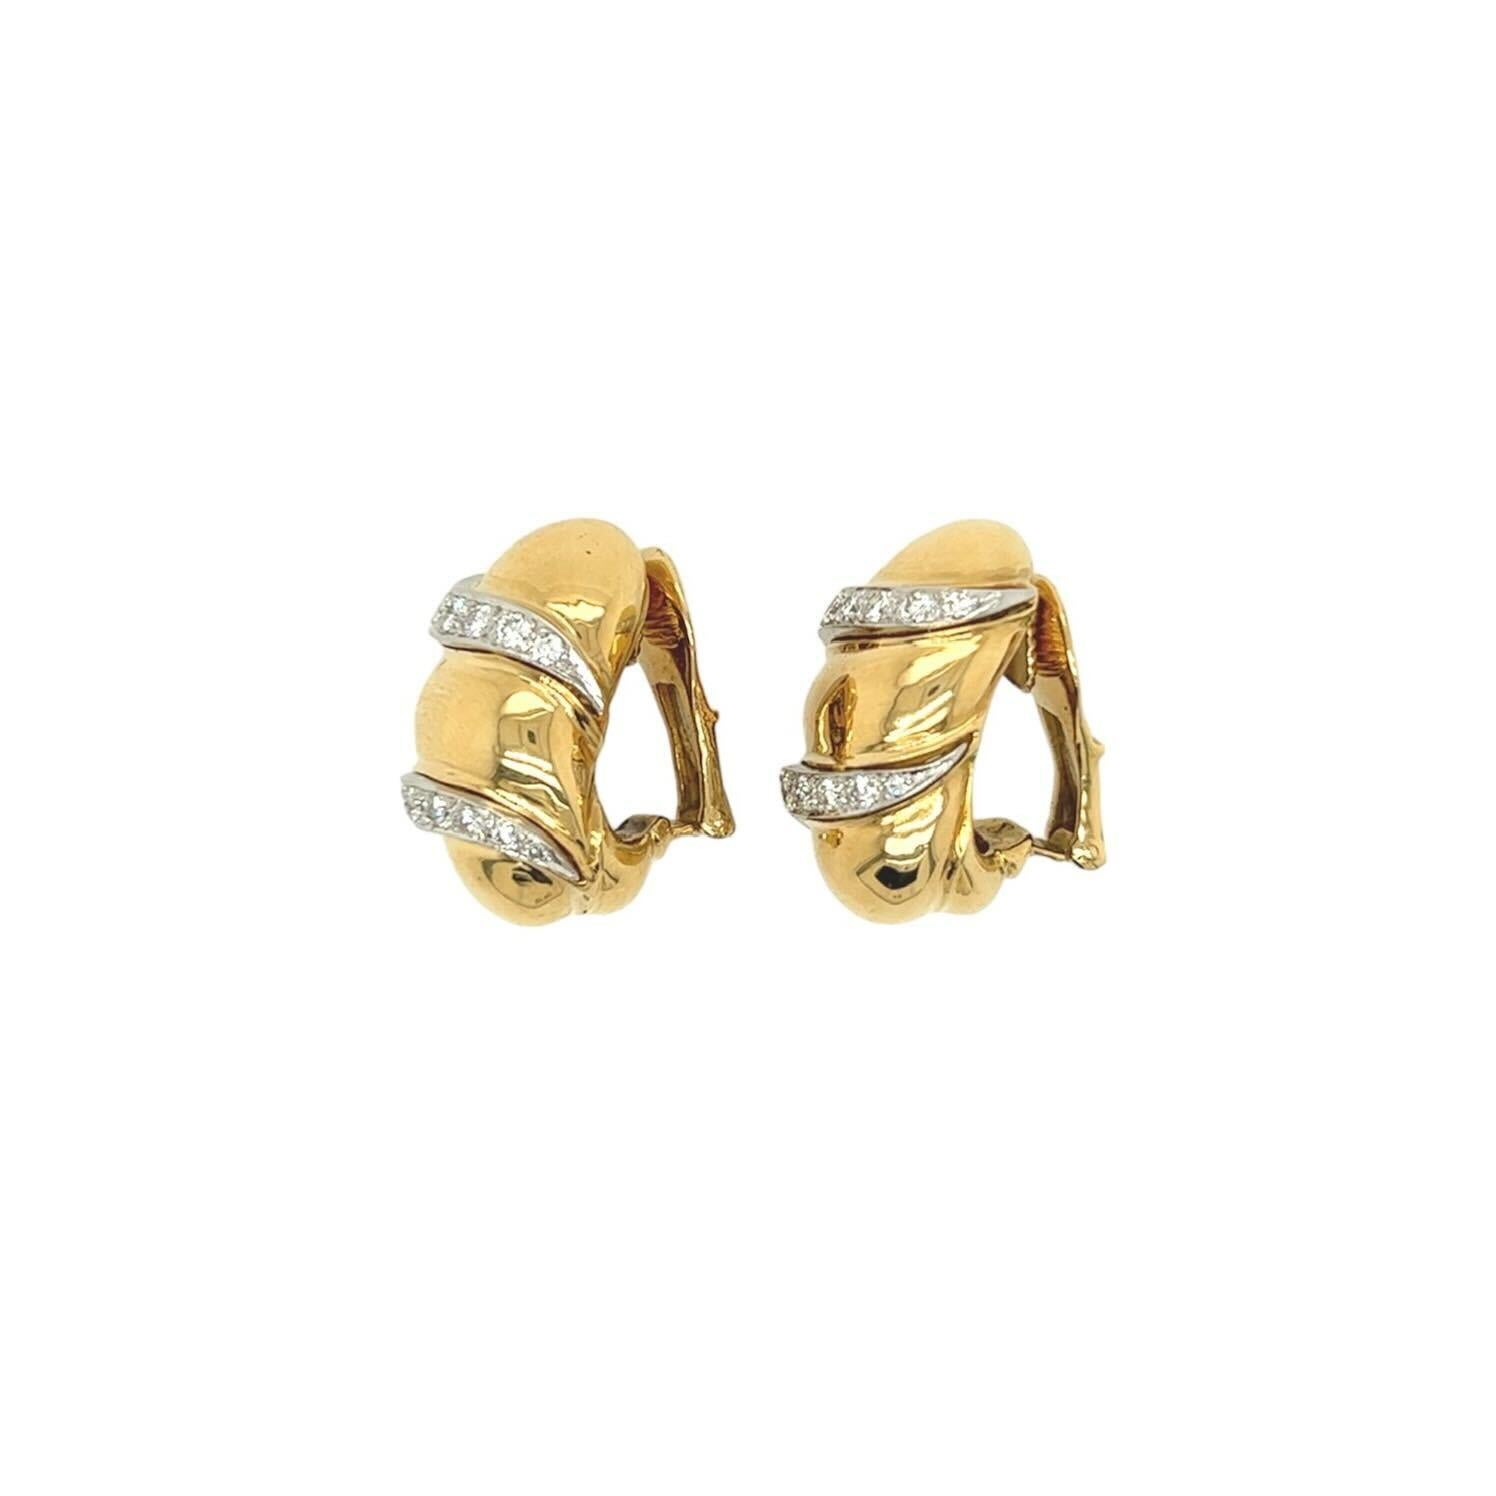 A pair of 18 karat yellow gold and diamond earclips, David Webb.  Each earclip designed as bombe oval applied with two undulating diagonal rows set with eighteen (18) round brilliant cut diamonds.  Total diamond weight approximately 1.42 carats. 